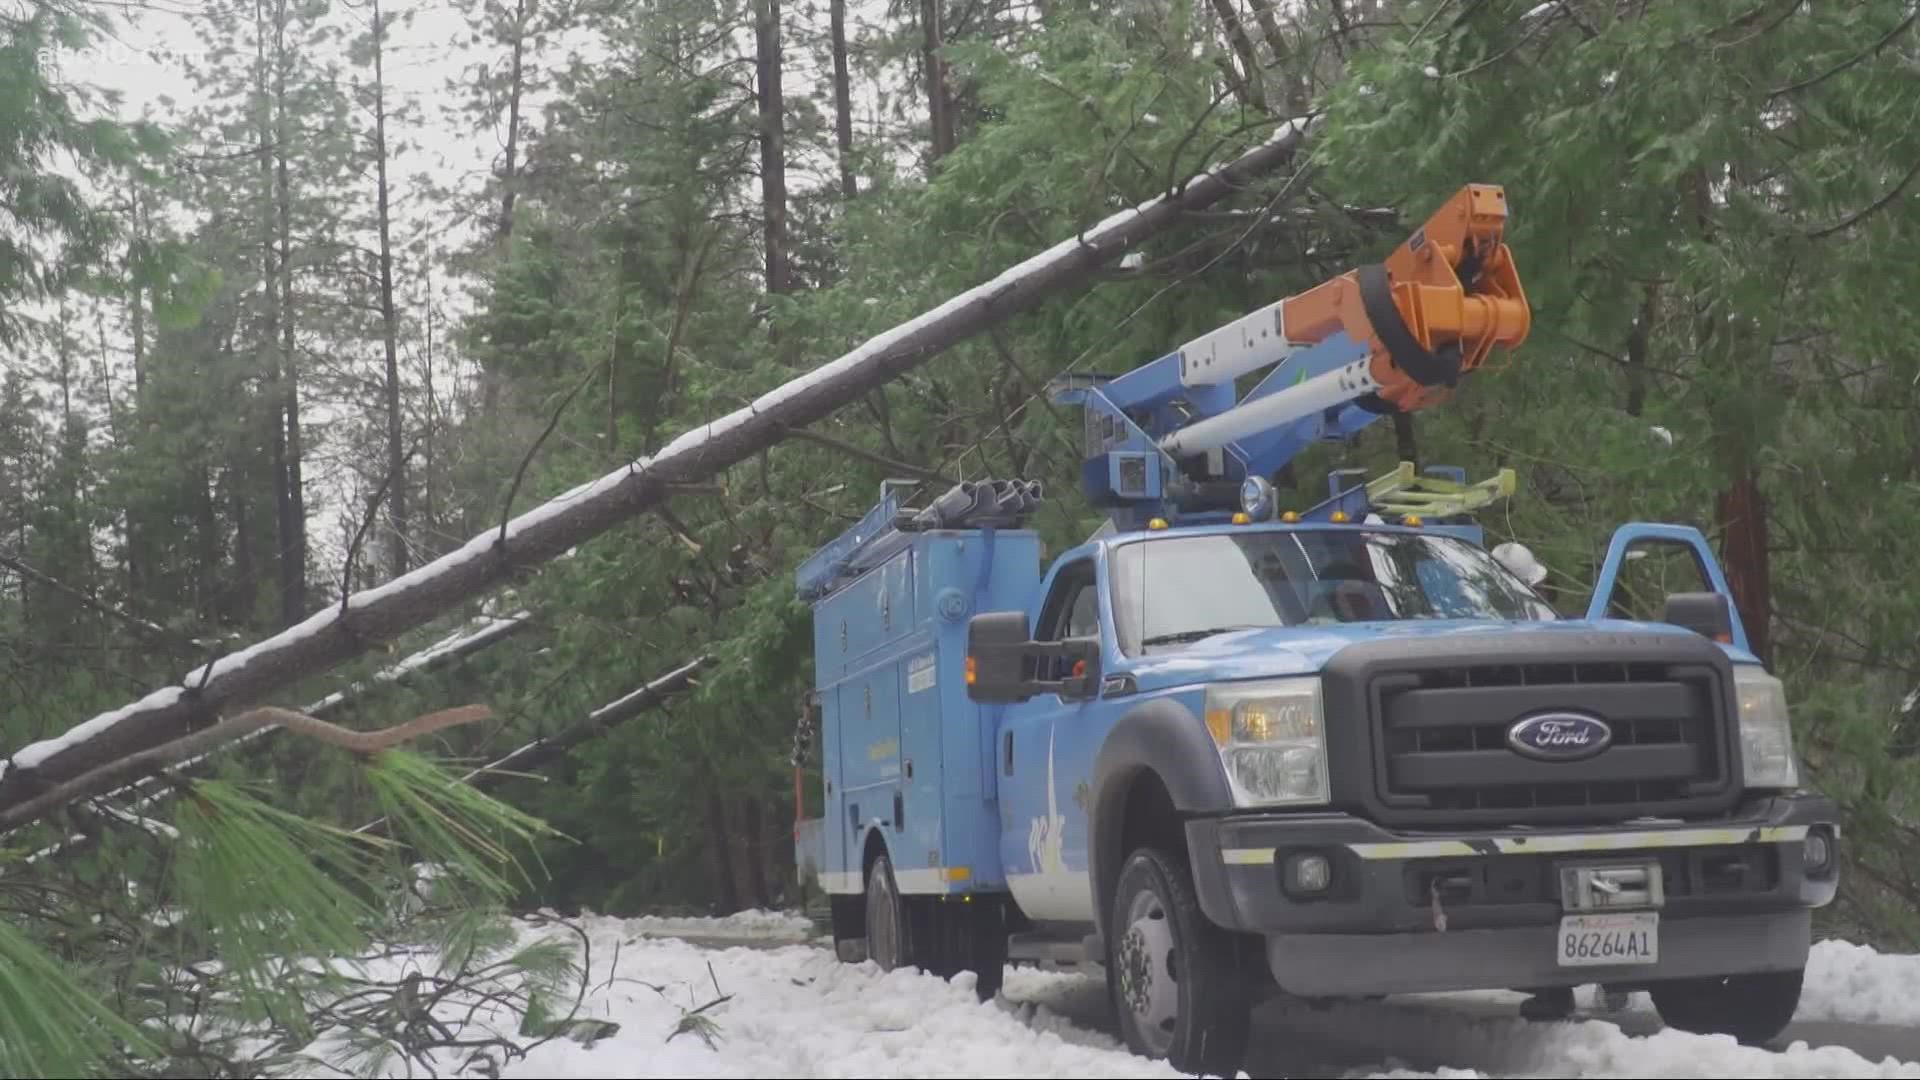 As the year comes to an end, instead of celebrating, many in the sierra are trying to the freezing temperatures as they wait for the power to come back on.